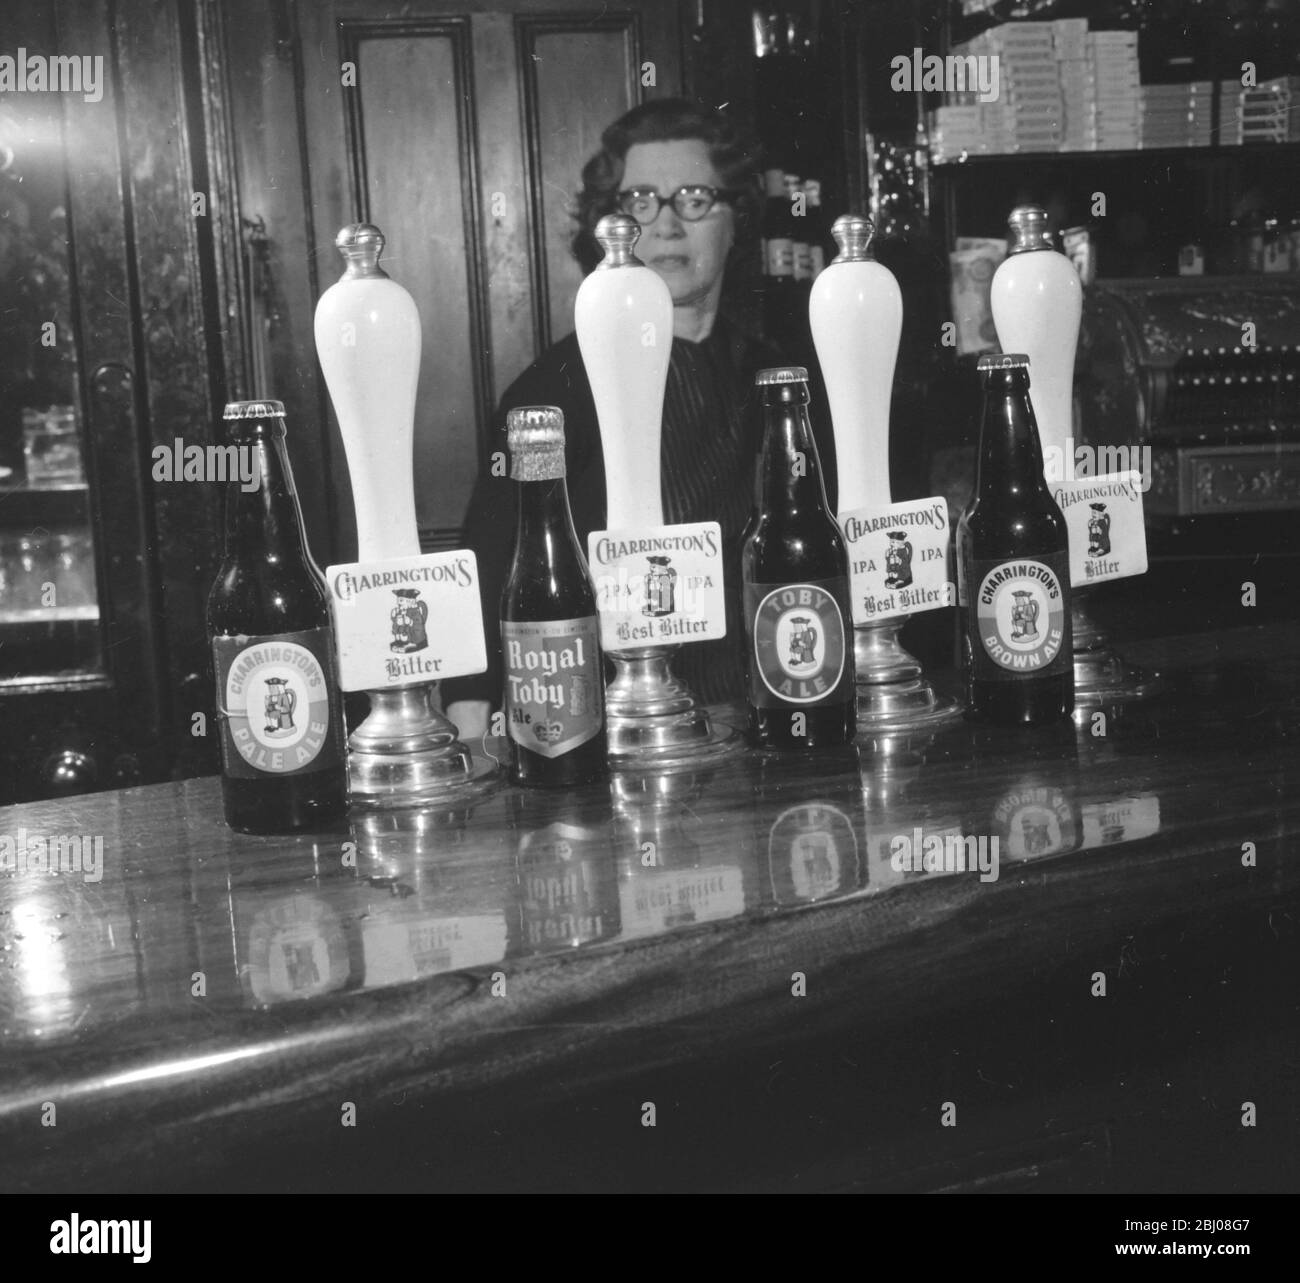 SPECIAL MELBOURNE HERALD LONDON PUB CHARRINGTON DRAUGHT BEER - 10 MARCH 1961 Stock Photo